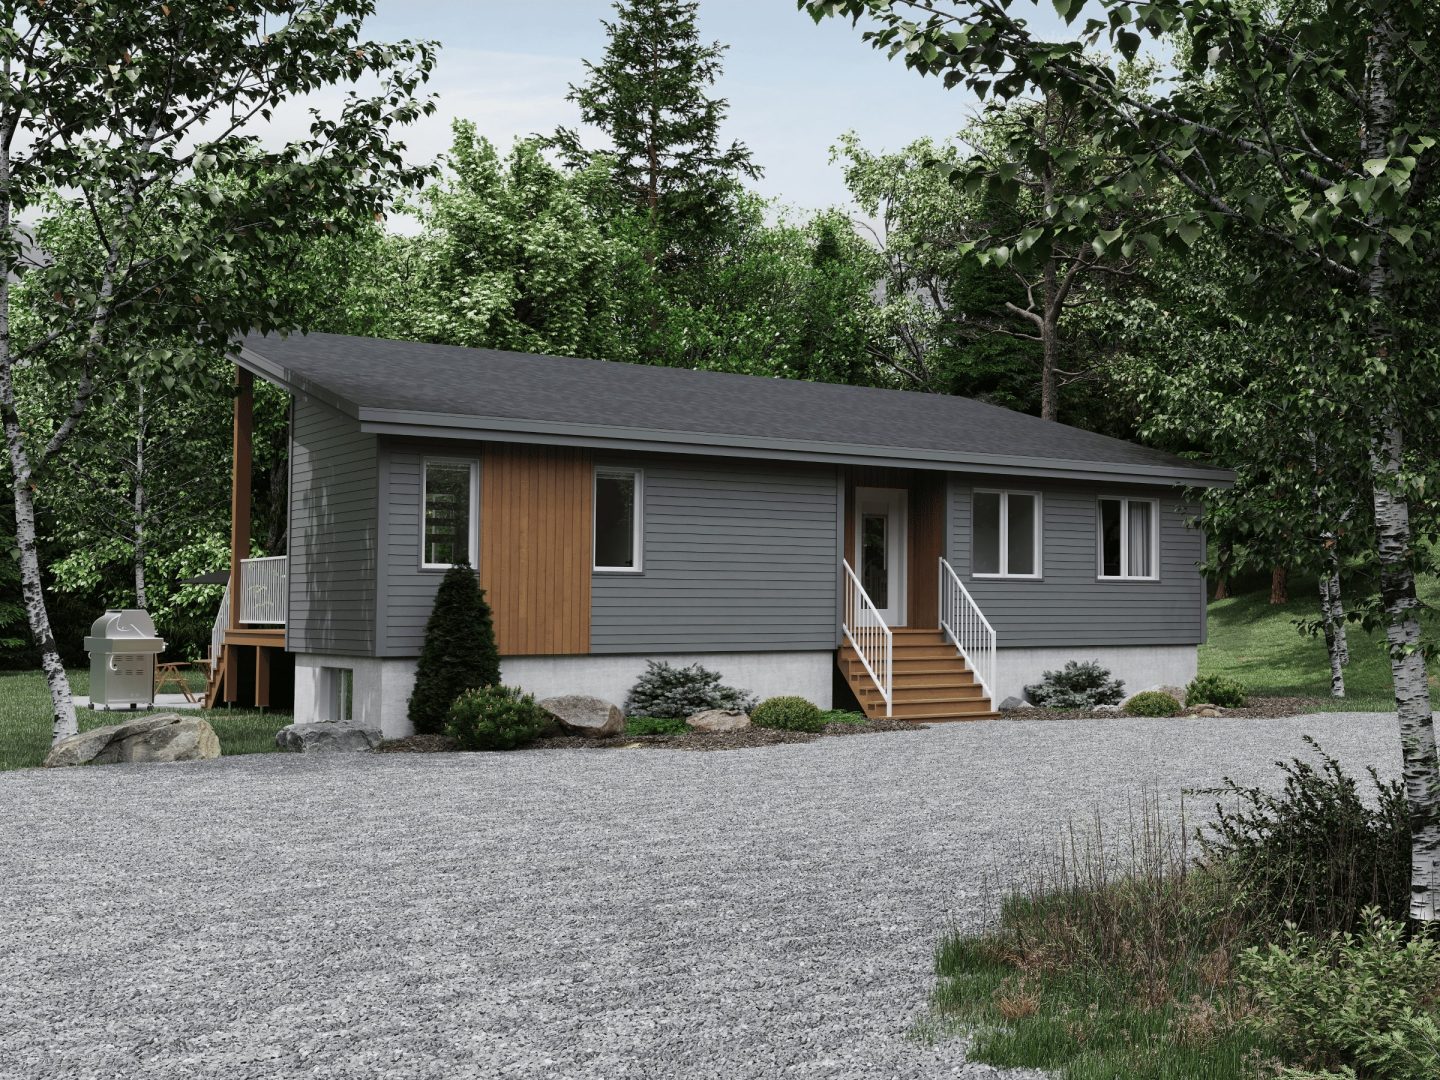 Alizé model, a modern-style chalet. View of the front exterior.